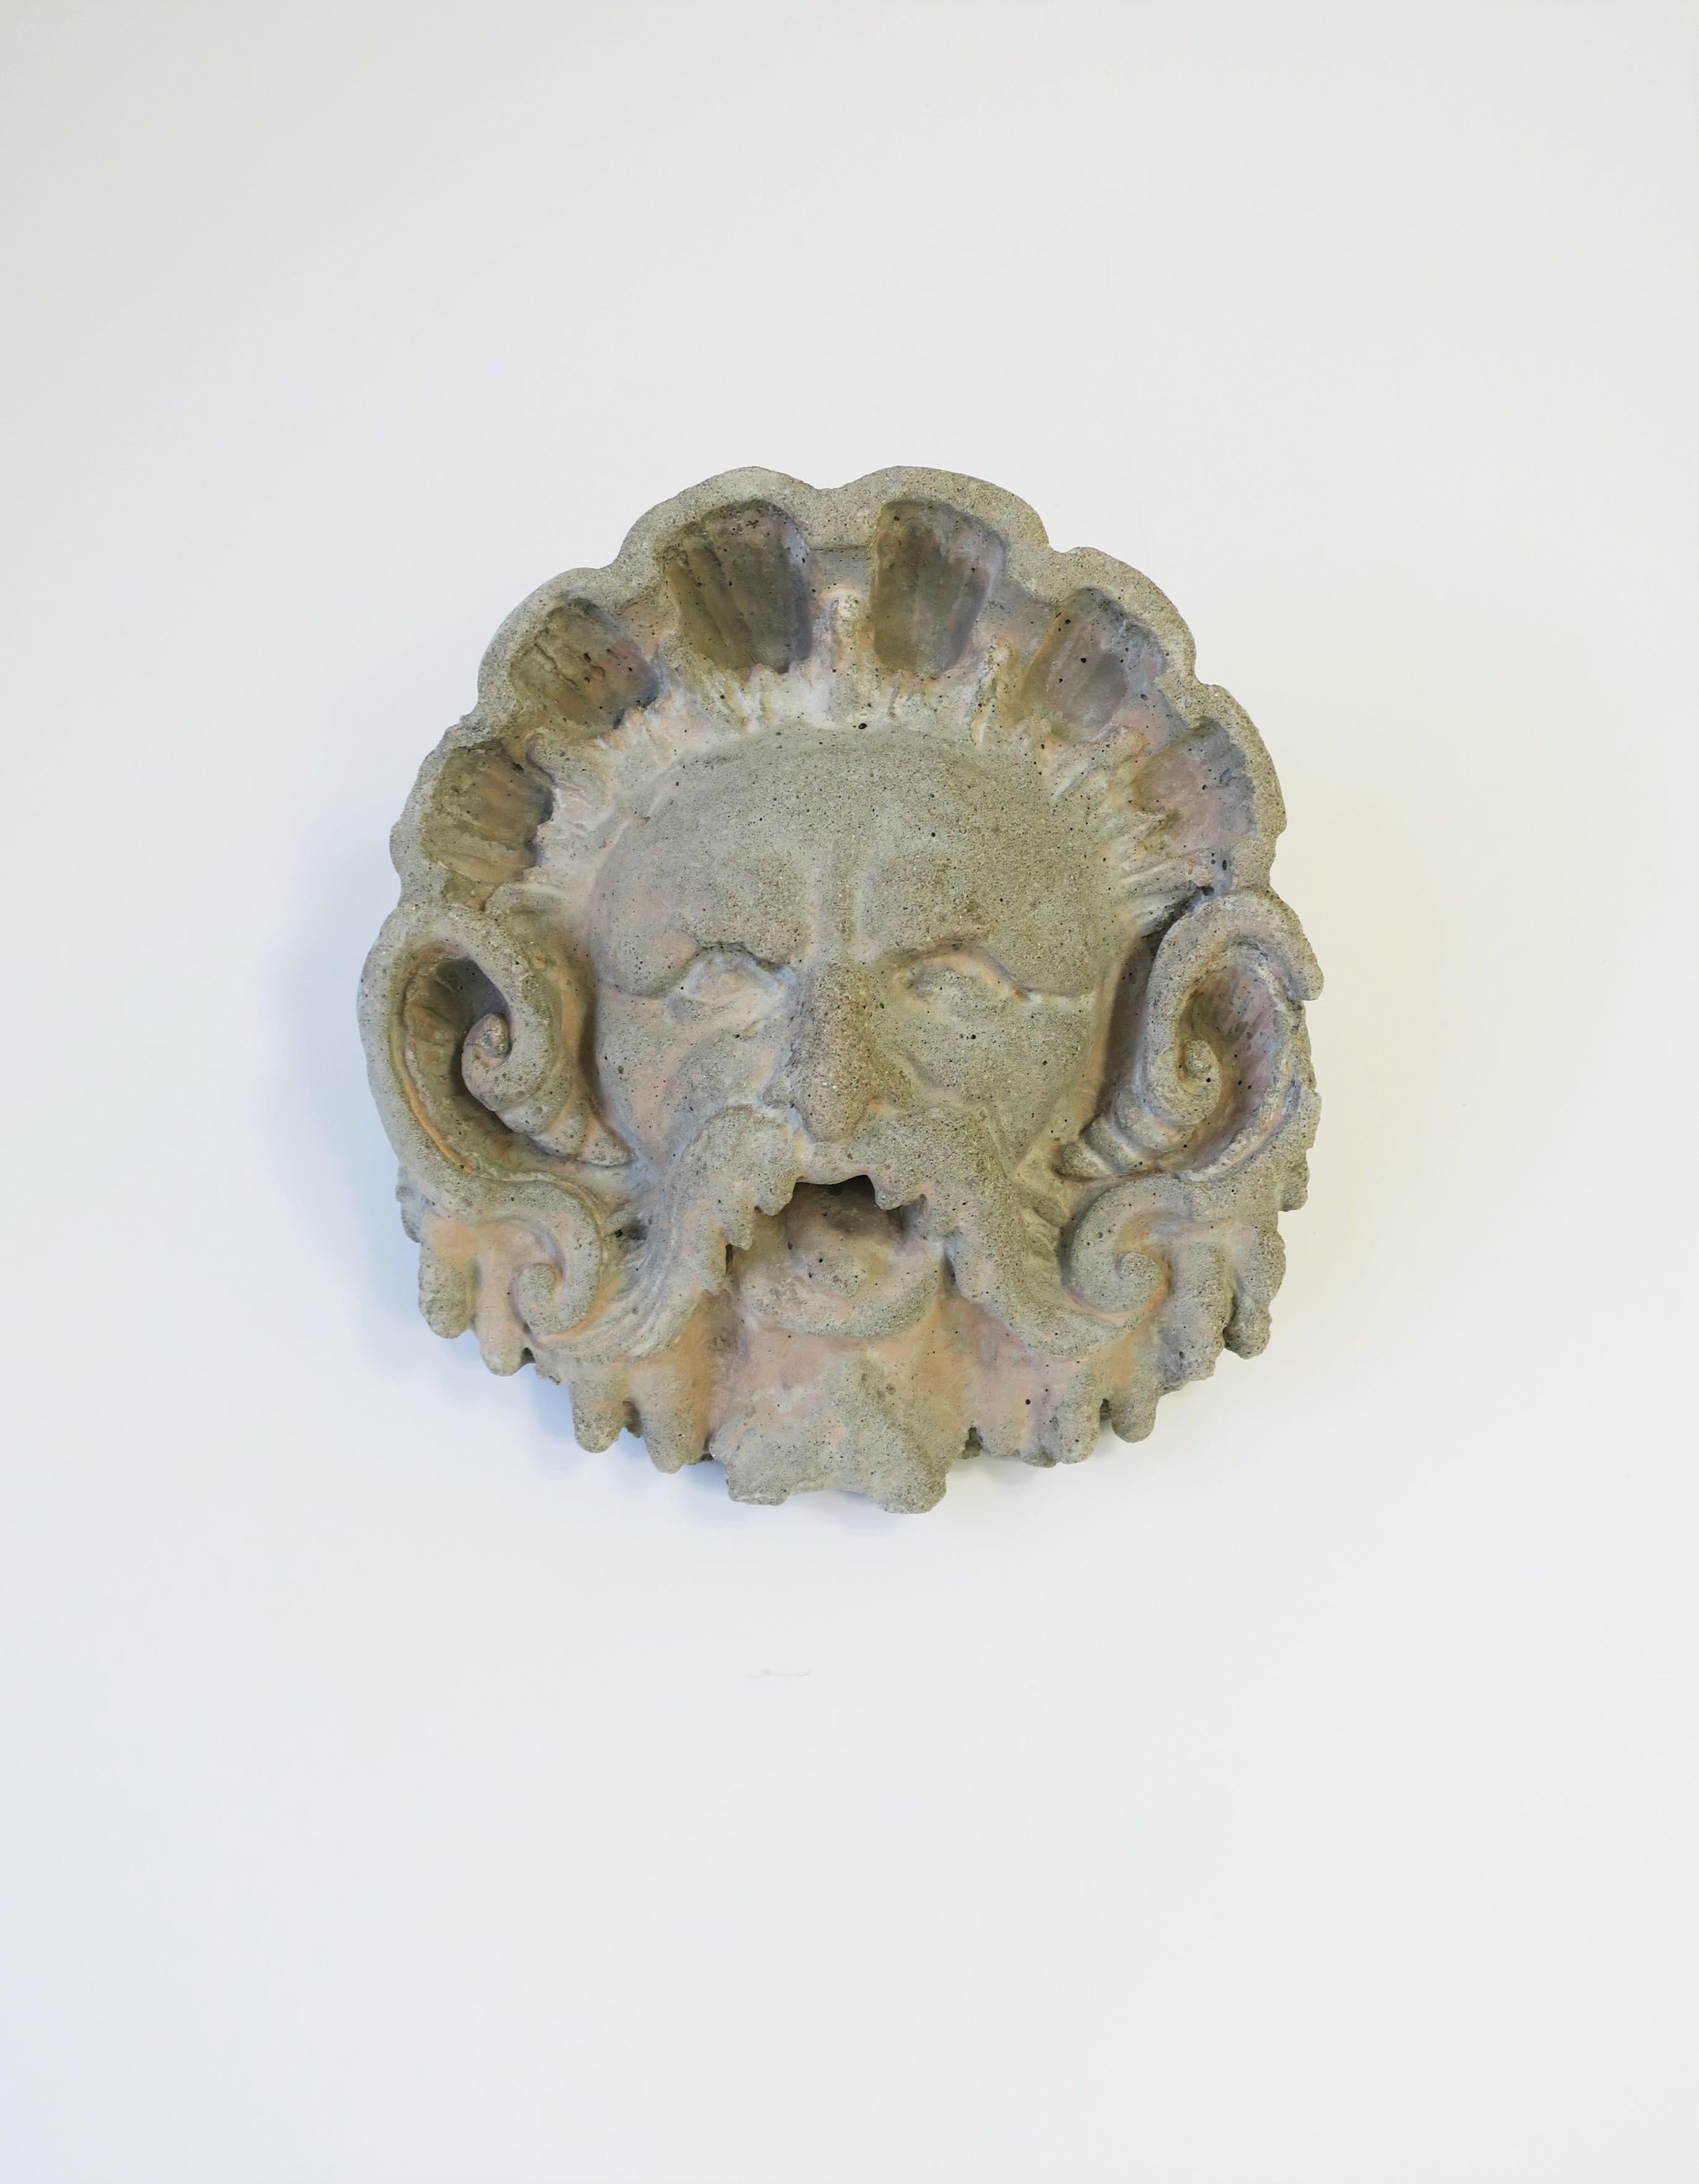 A substantial 20th century garden god face or 'facemask' fountain sculpture head element. Piece is made of concrete and iron with round hole at mouth open from front to back for water flow. Close-up of hole, front and back, see images 6, 7 and 11.